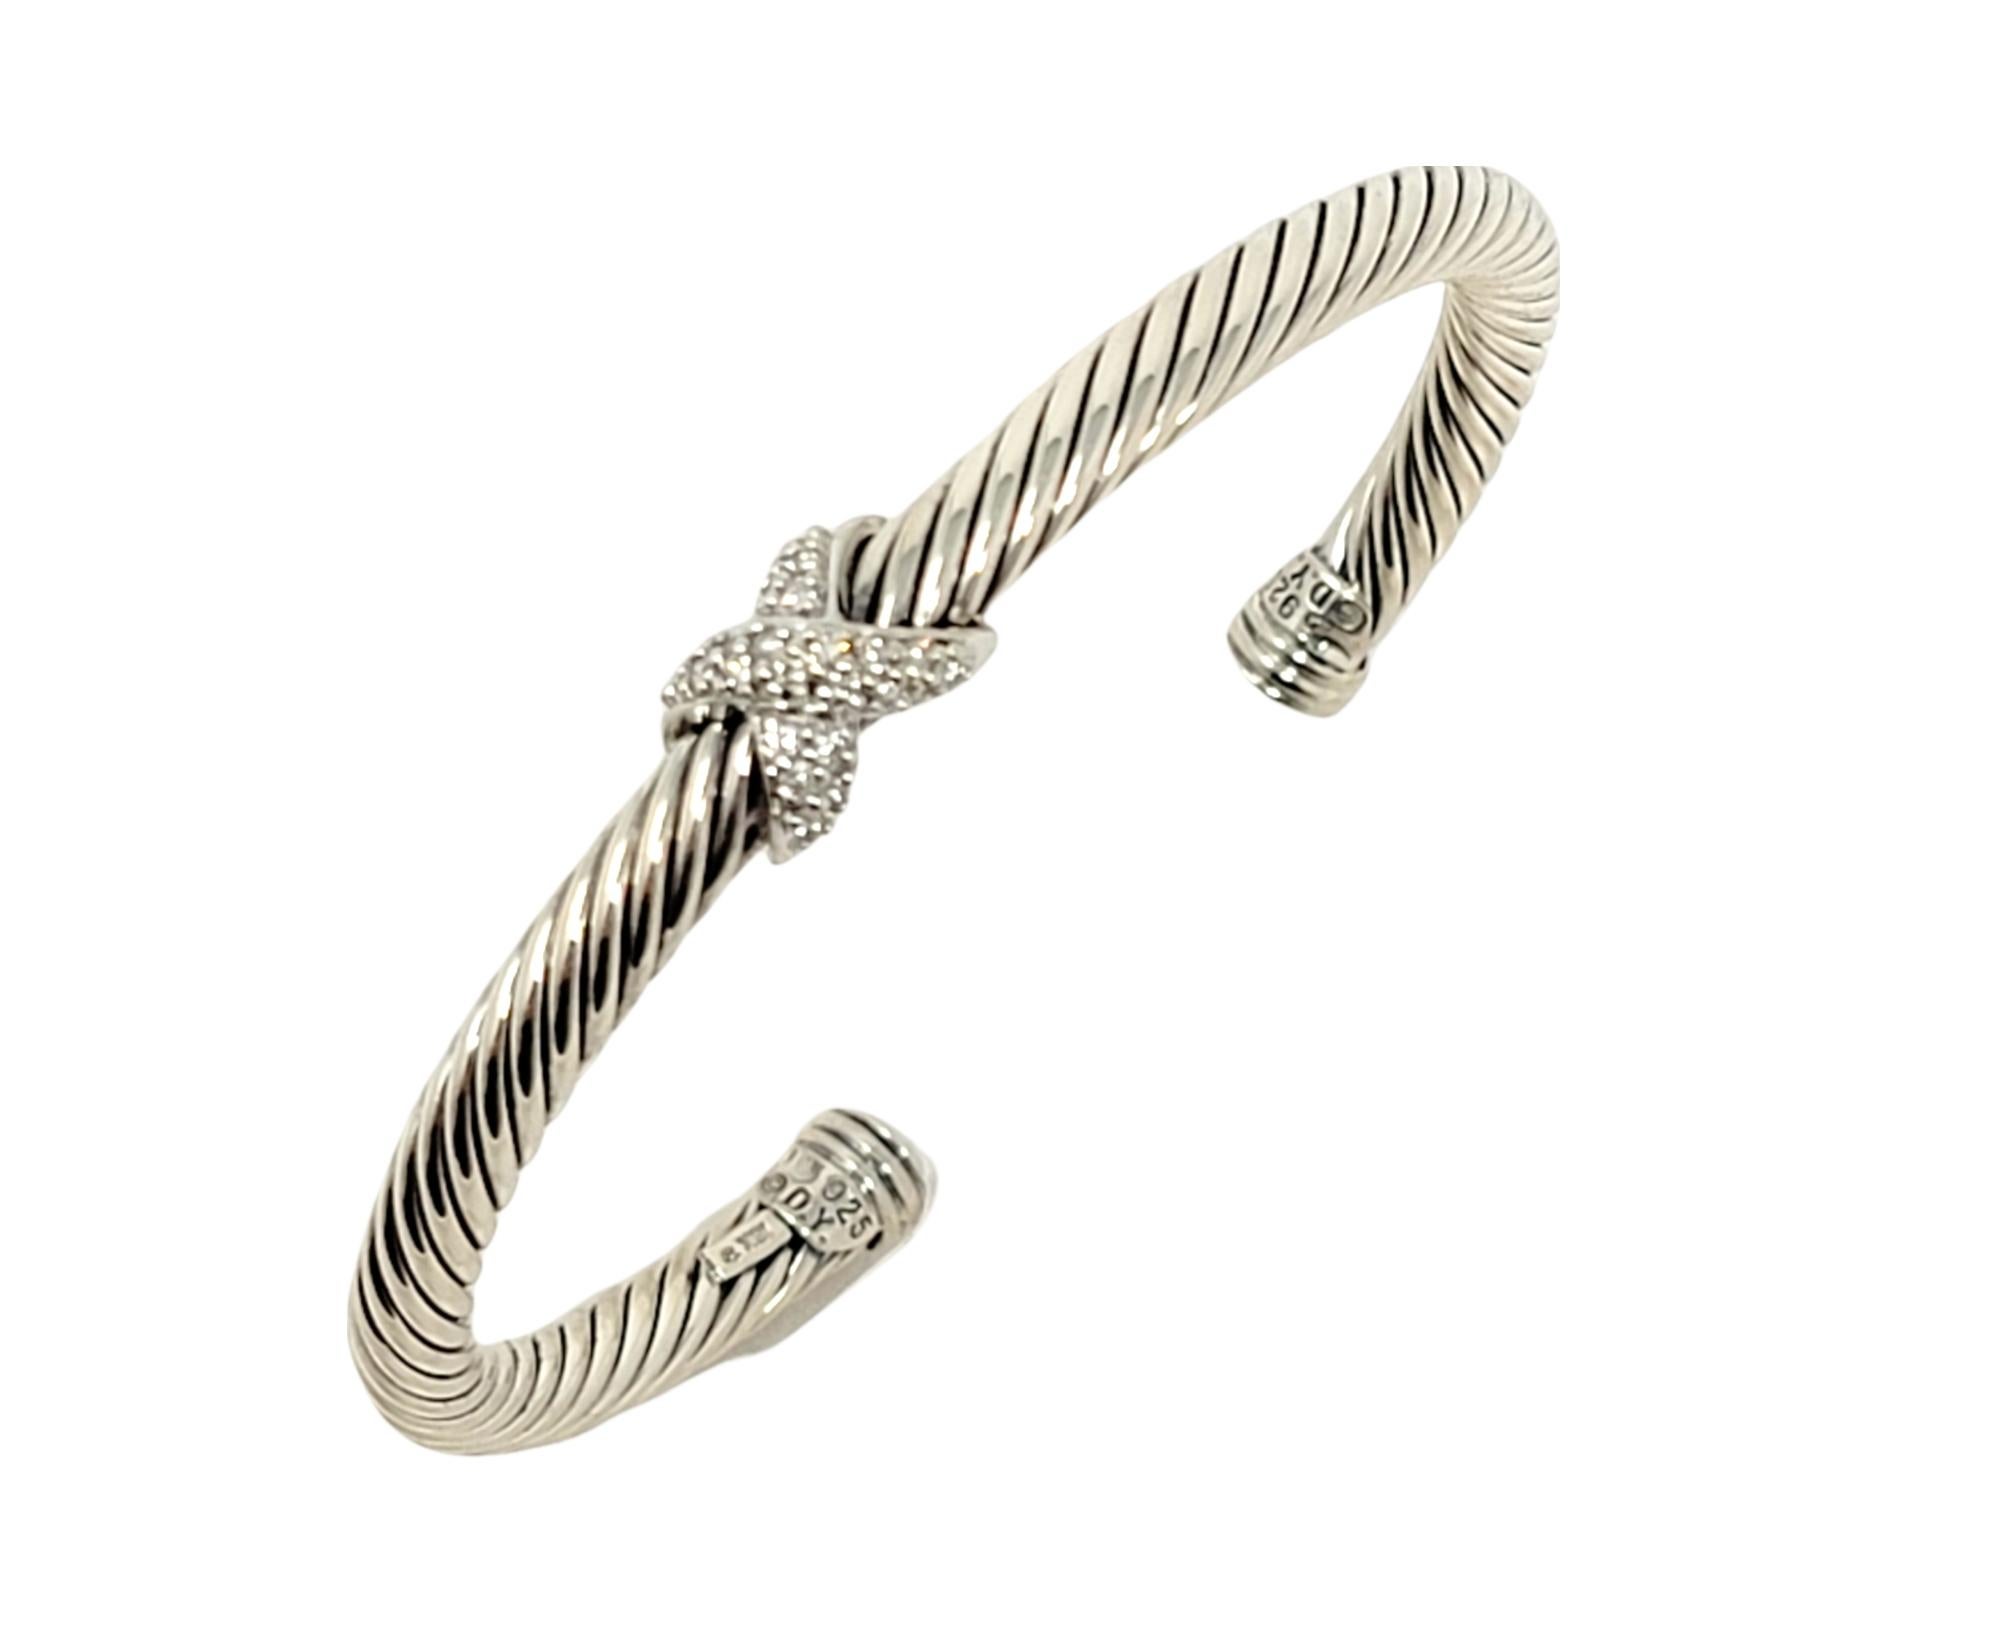 Beautiful contemporary cable bangle bracelet by jewelry designer, David Yurman. It features his signature twisted cable design in sterling silver accented by a diamond embellished 'X' at the center.  

Metal: Sterling Silver
Natural Diamonds: .14